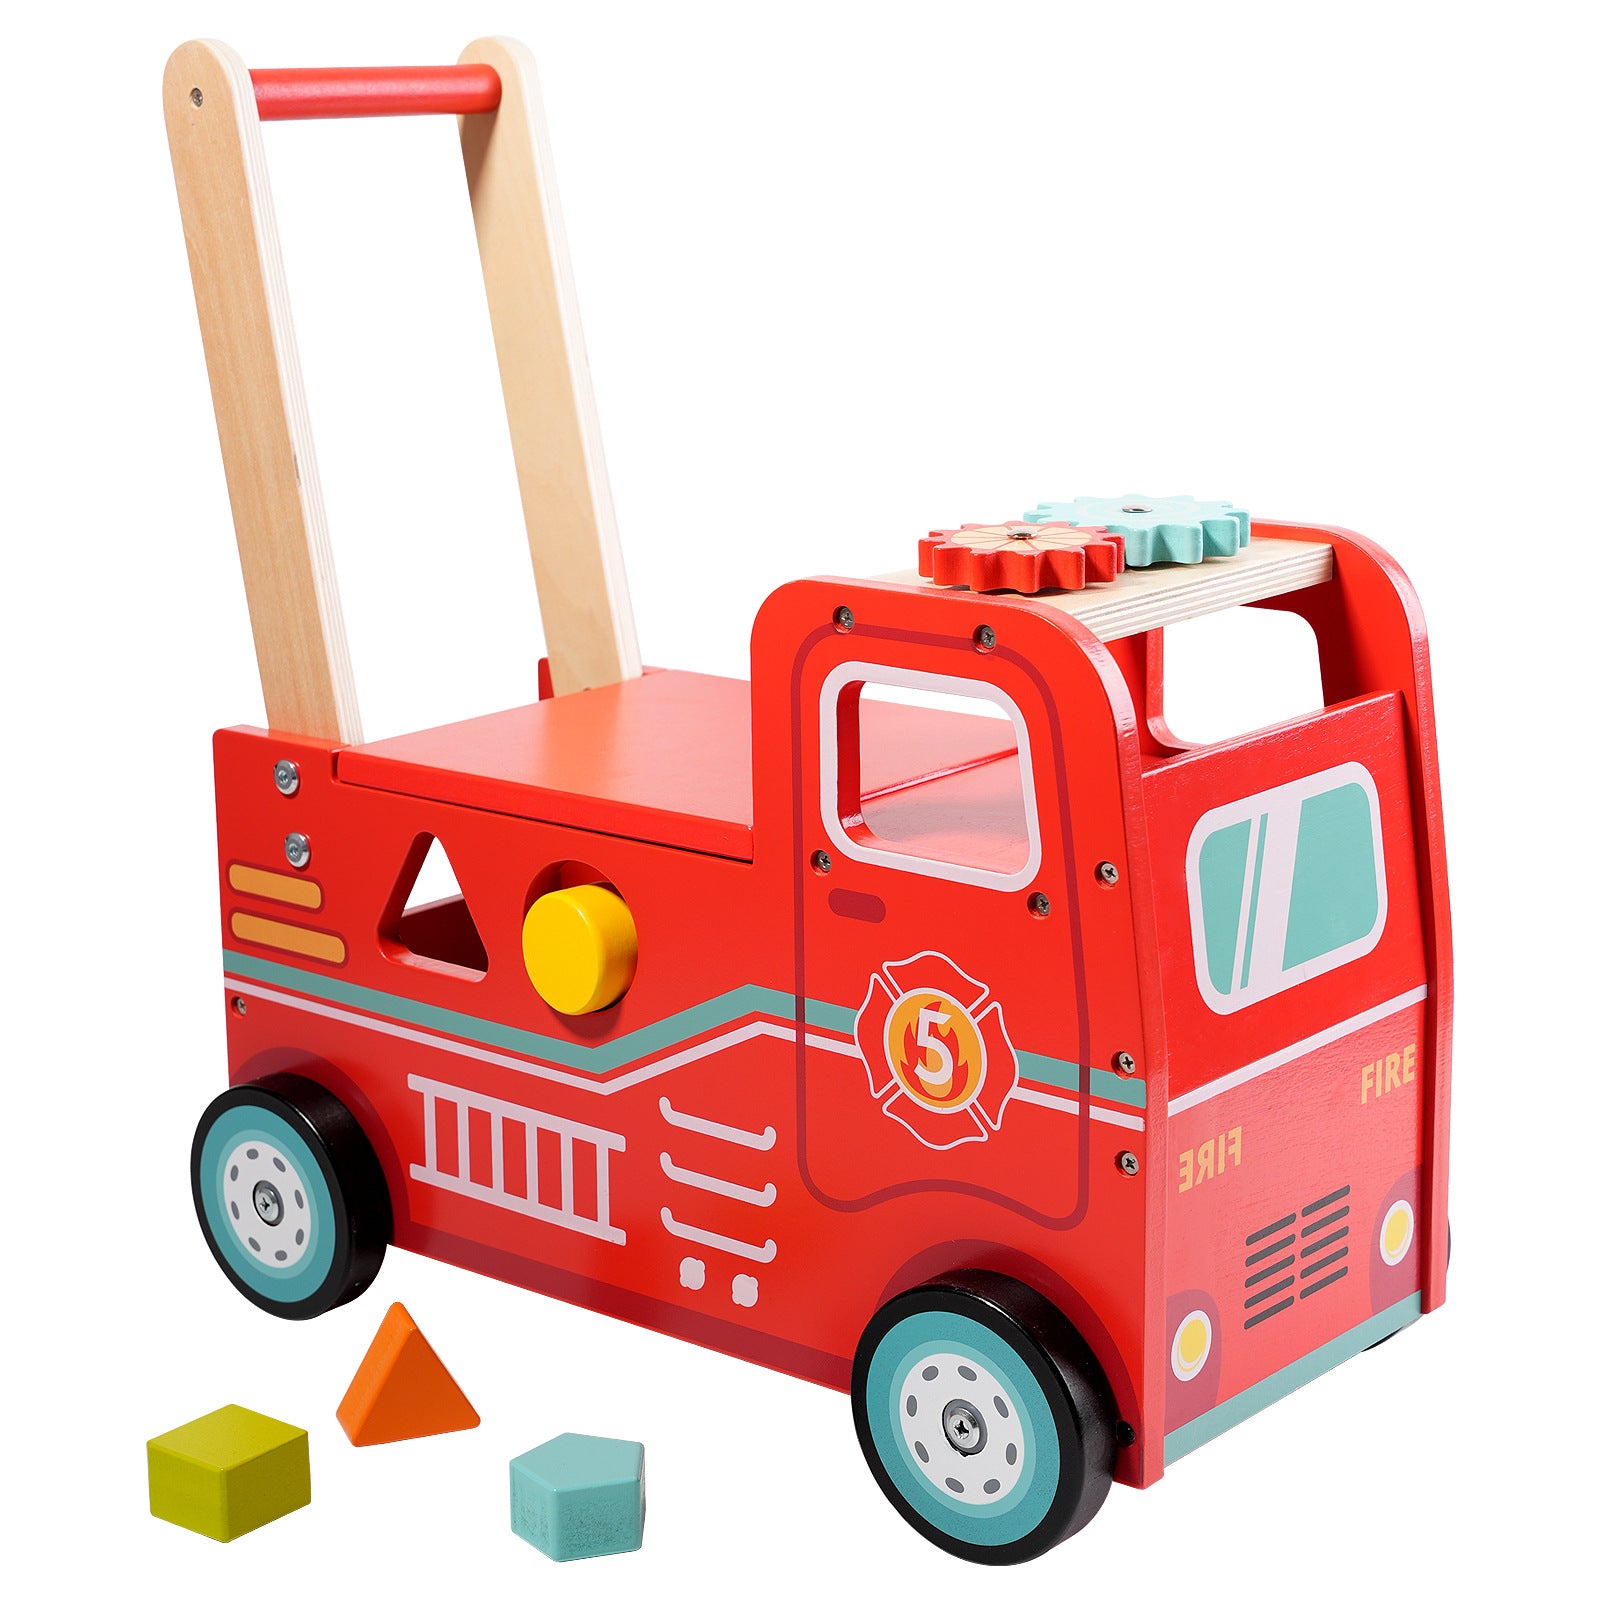 Multipurpose Wooden Baby Walker Ride-On Toy - Fire Engine